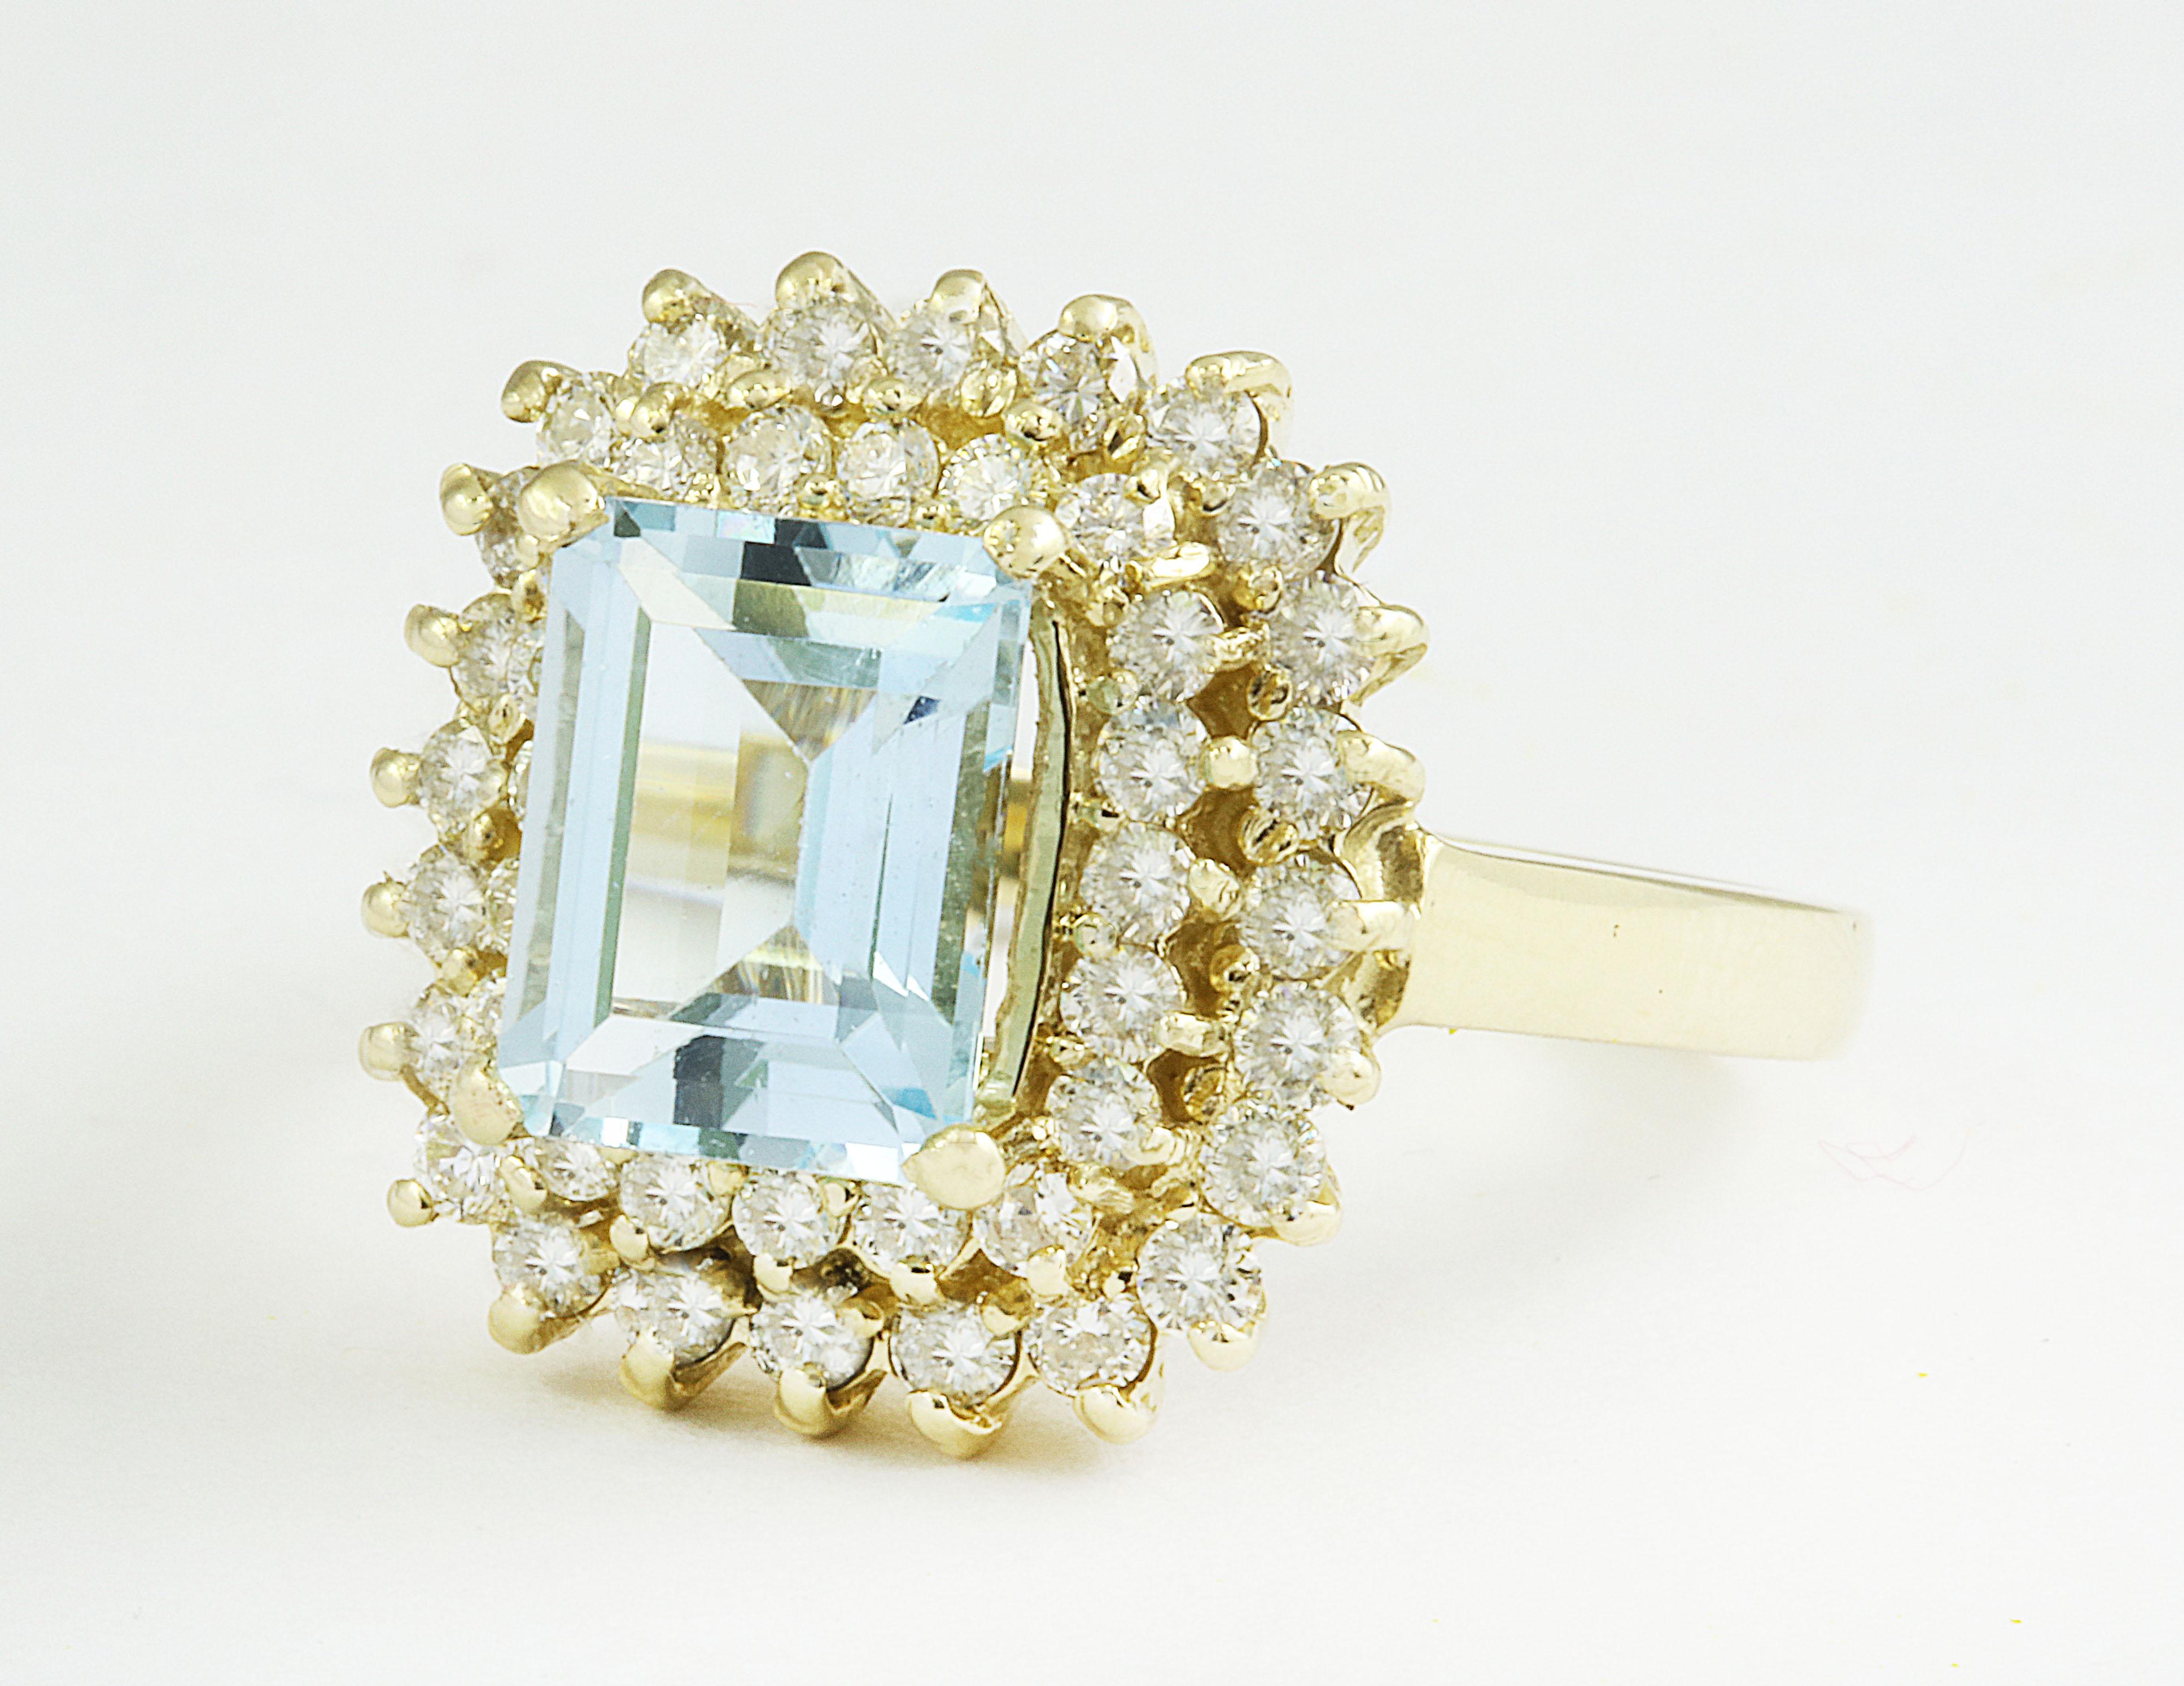 Elevate your elegance with our 2.95 carat aquamarine diamond ring in 14K yellow gold. Featuring a captivating 2.00 carat aquamarine and 0.95 carats of diamonds, this ring is a statement of sophistication. With a total weight of 5.8 grams and a face